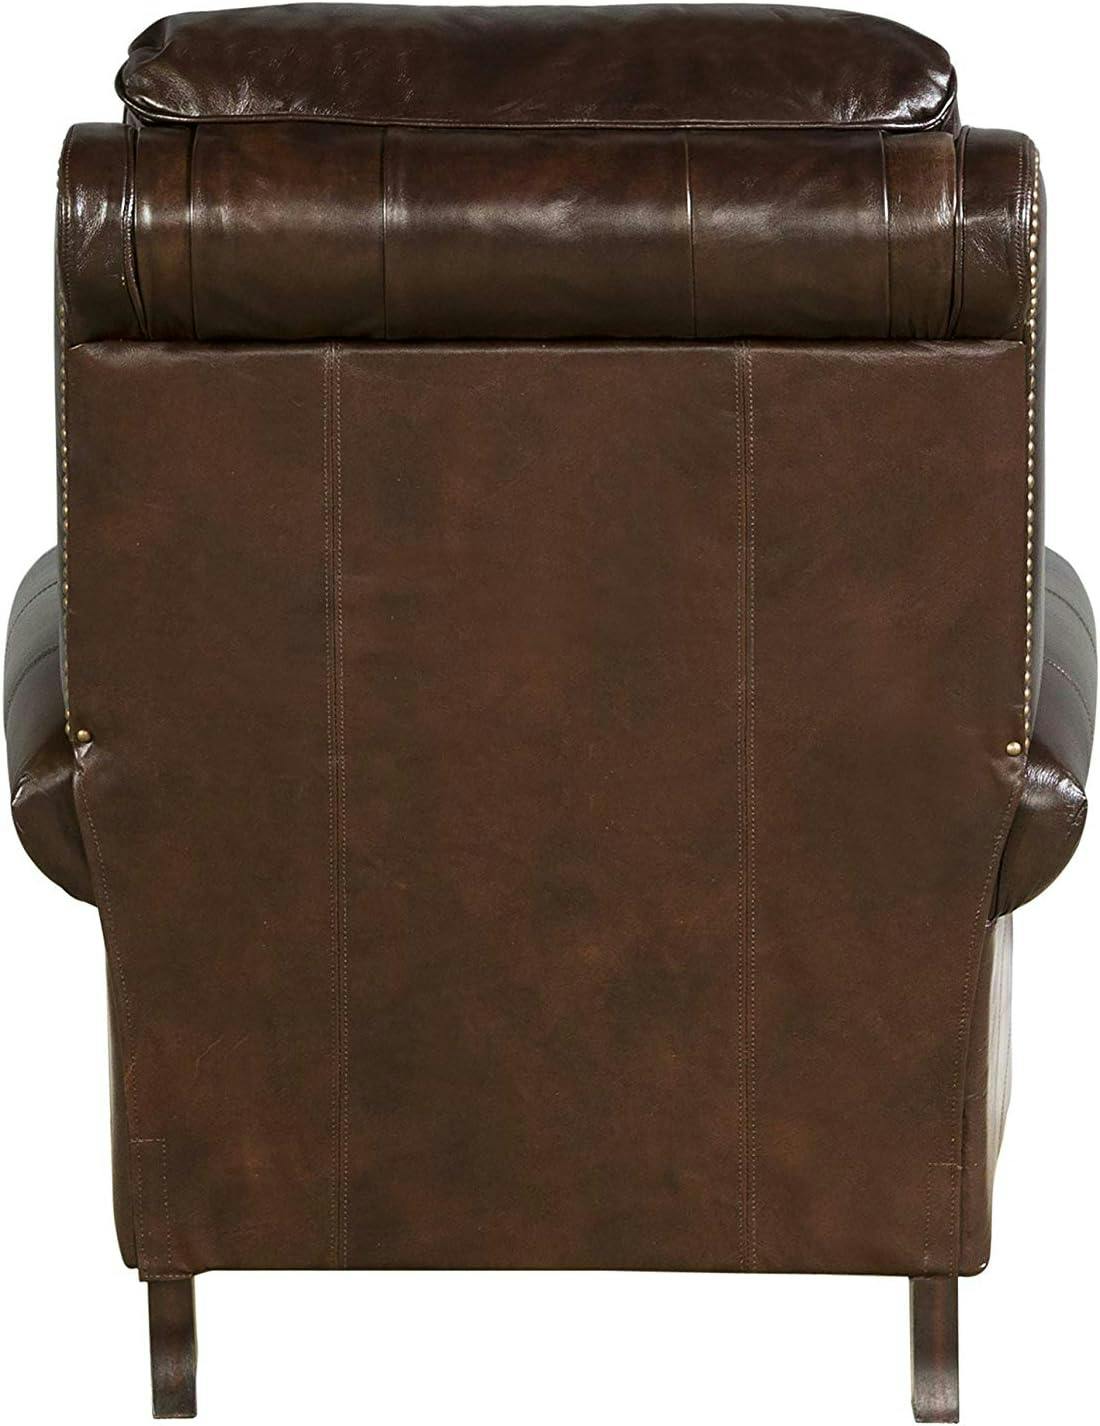 Contemporary Churchill Brown Leather Recliner with Espresso Wood Legs